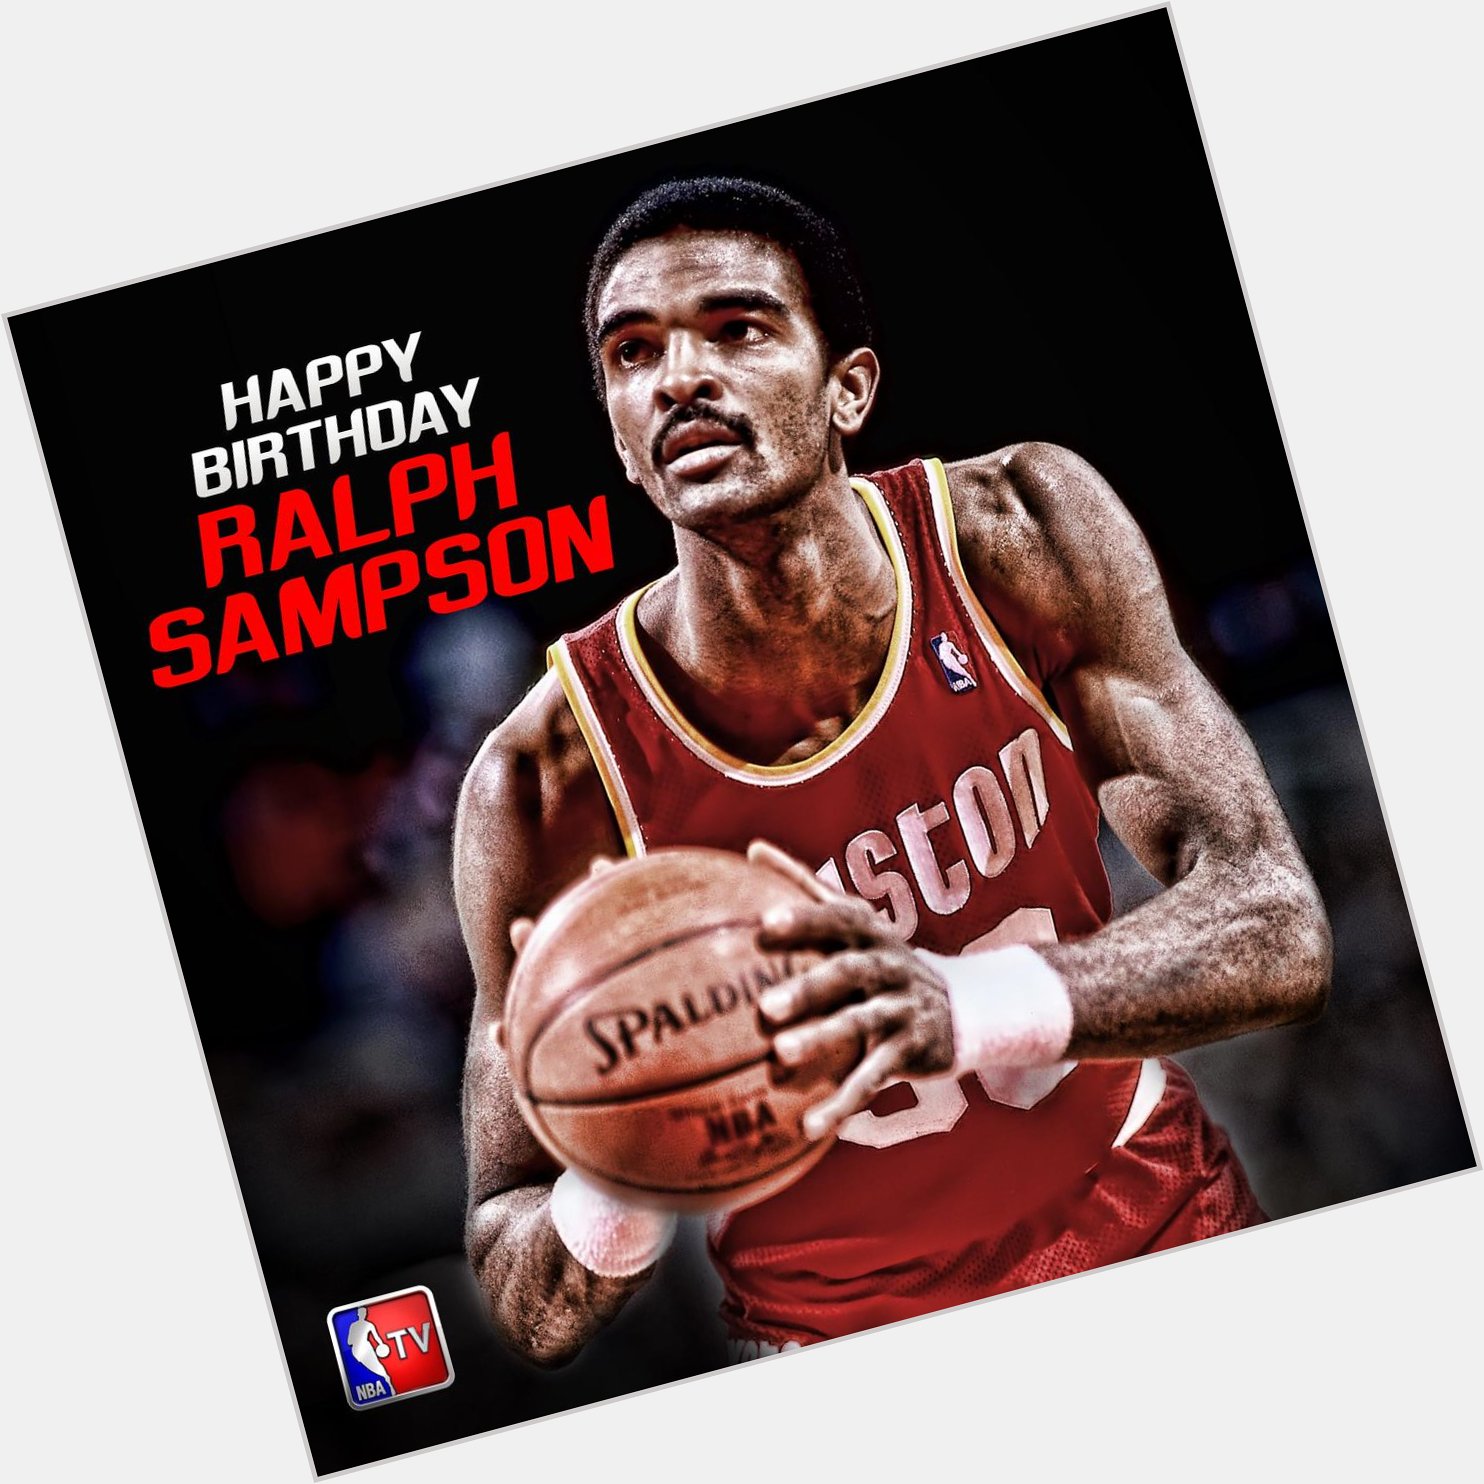 Join us in wishing a Happy Birthday to 4-time All-Star Ralph Sampson! 